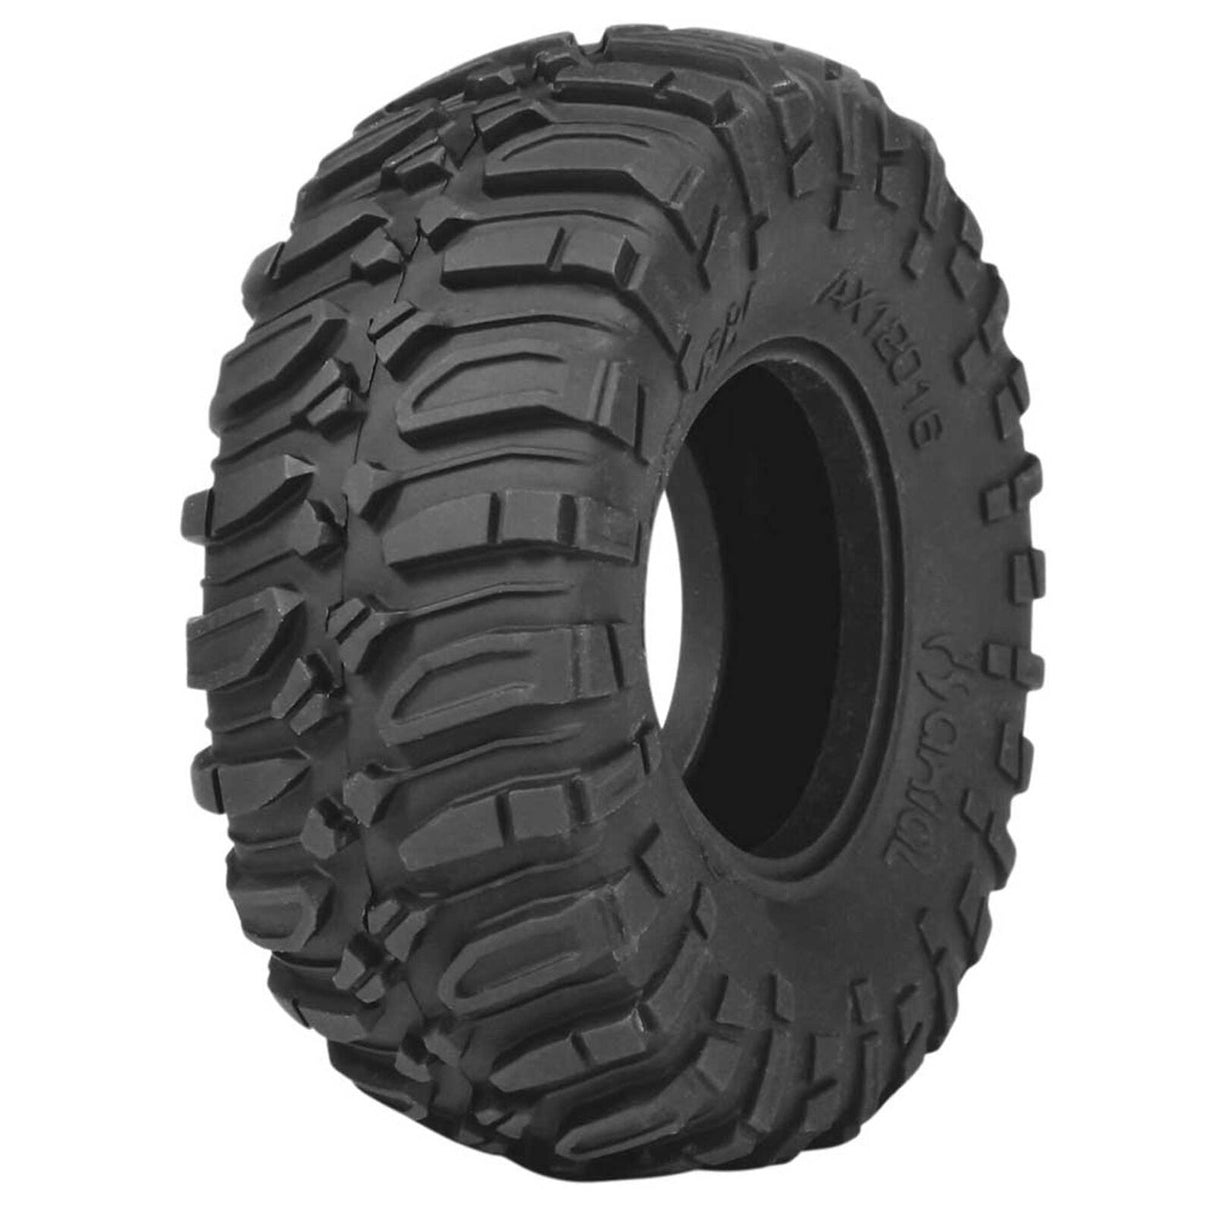 Axial AX12016 1.9 Ripsaw Tires R35 Compound (2)